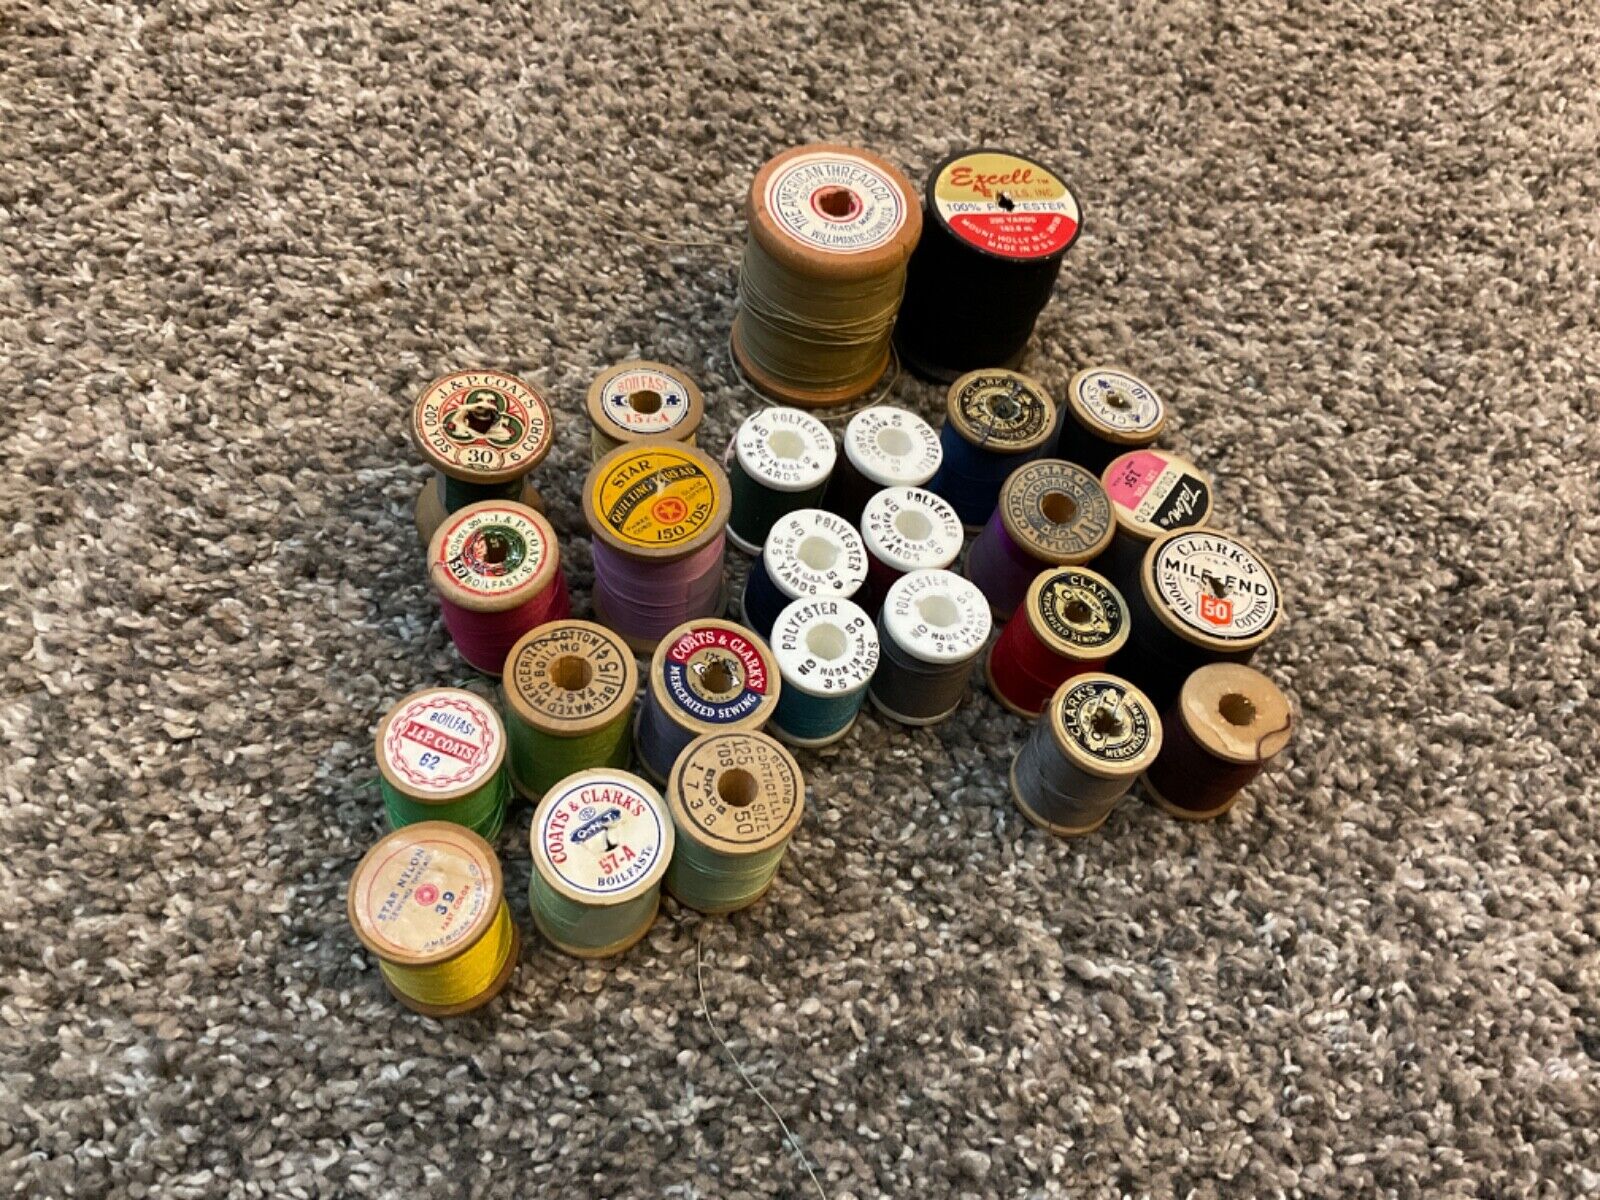 26 Vintage Sewing Thread Wood Spools 1940s Mixed LOT COTTON &Variety Estate Sale